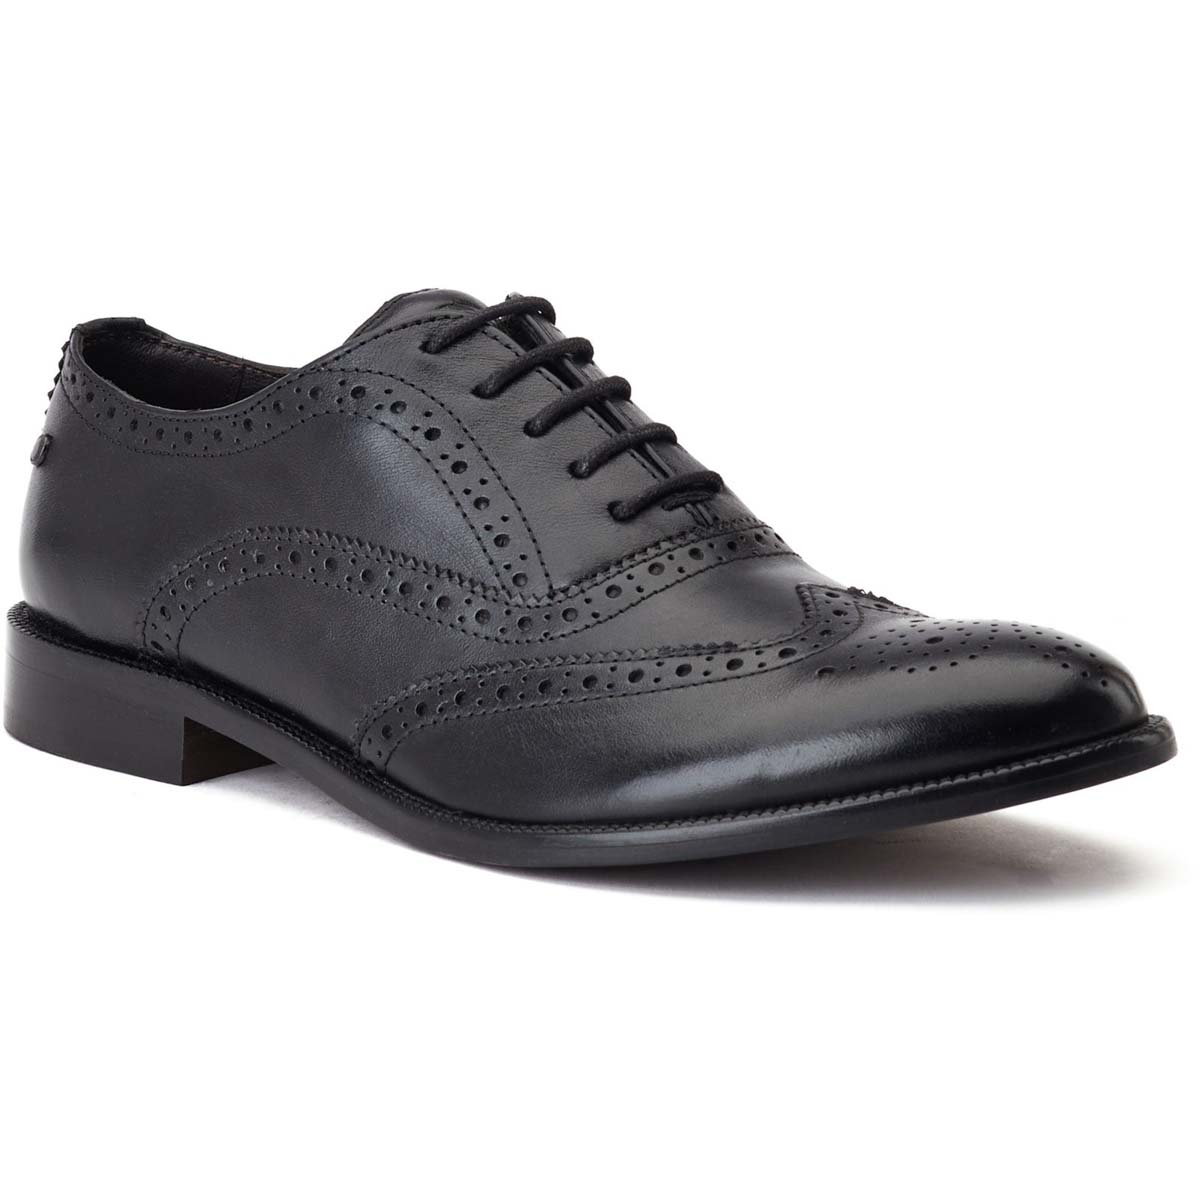 Base London Darcy Black Mens formal shoes WV03011 in a Plain Leather in Size 12